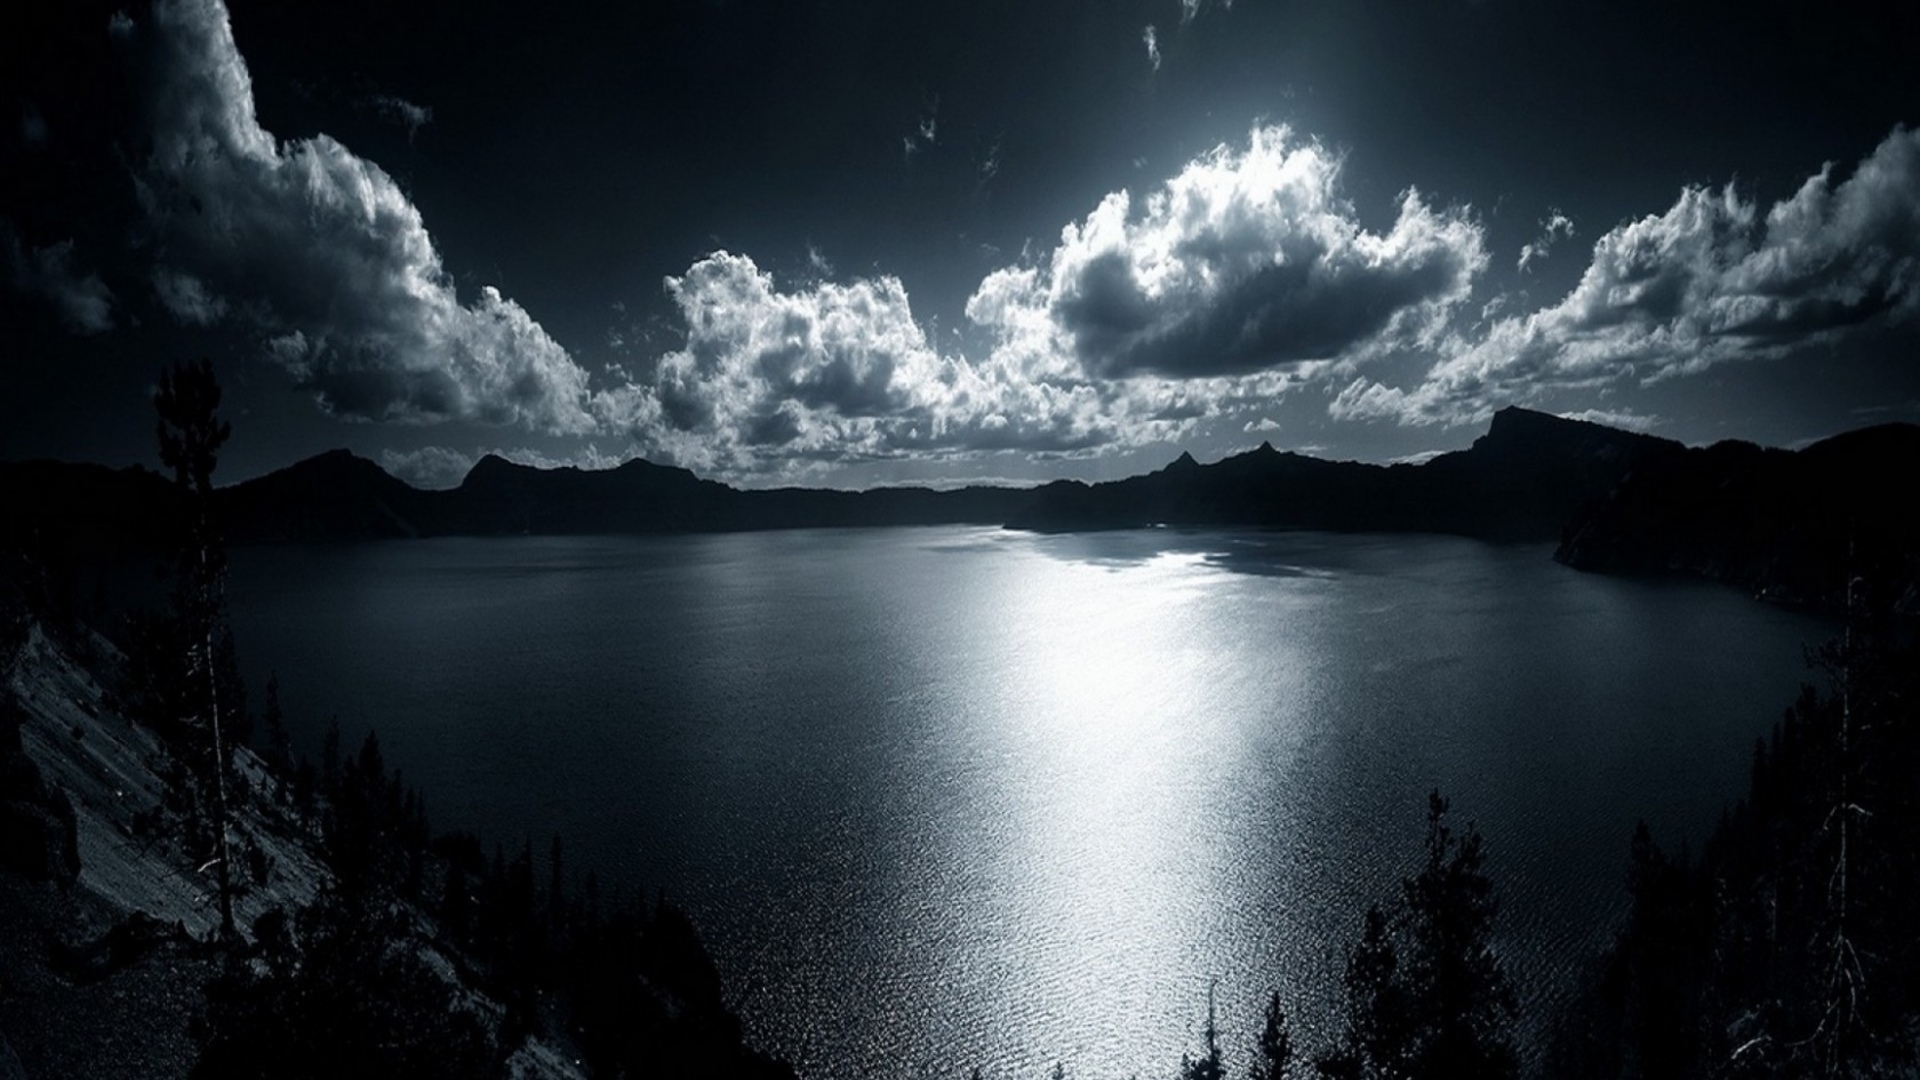 sky, Clouds, Night, Moonlight, Moon, Glow, Silhouette, Lakes, Reflection, Shore, Reflection, Mood, Mountains Wallpaper